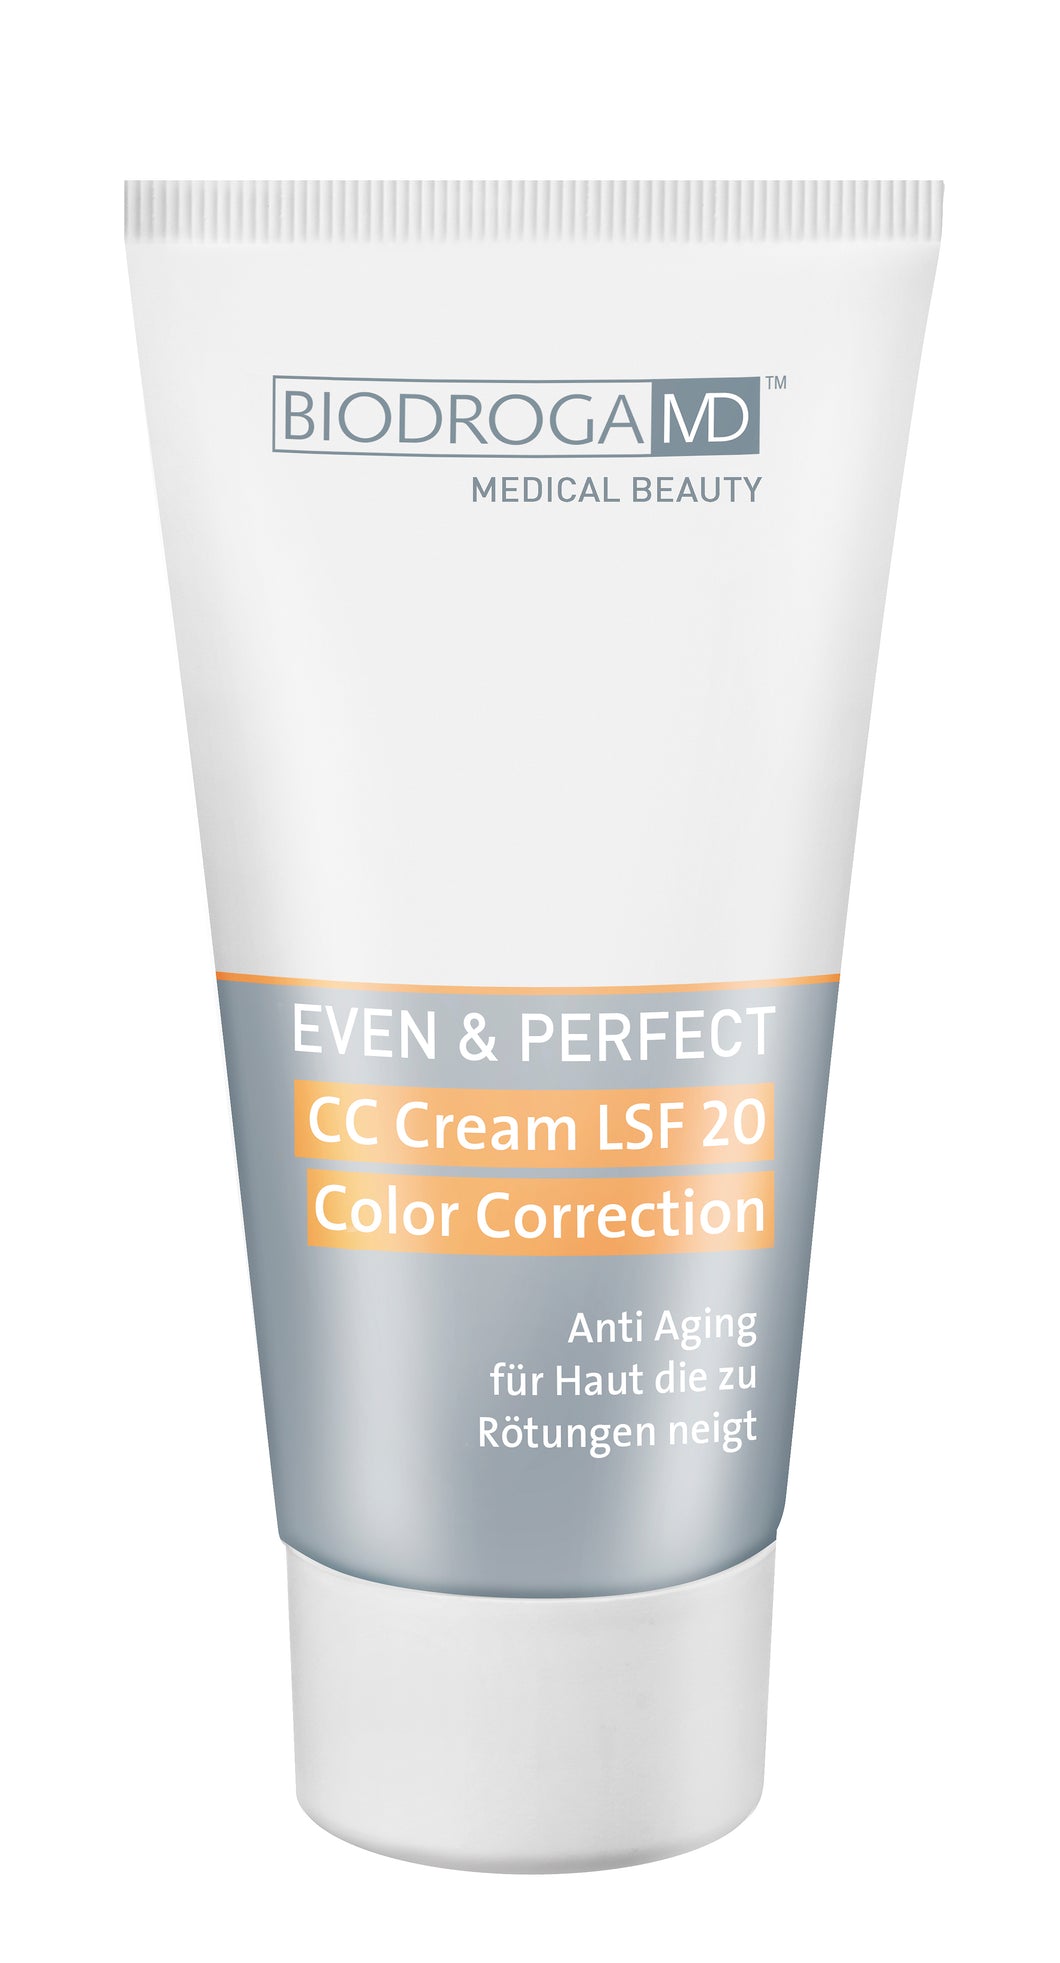 EVEN & PERFECT CC Cream LSF 20 Color Correction for skin tending to redness